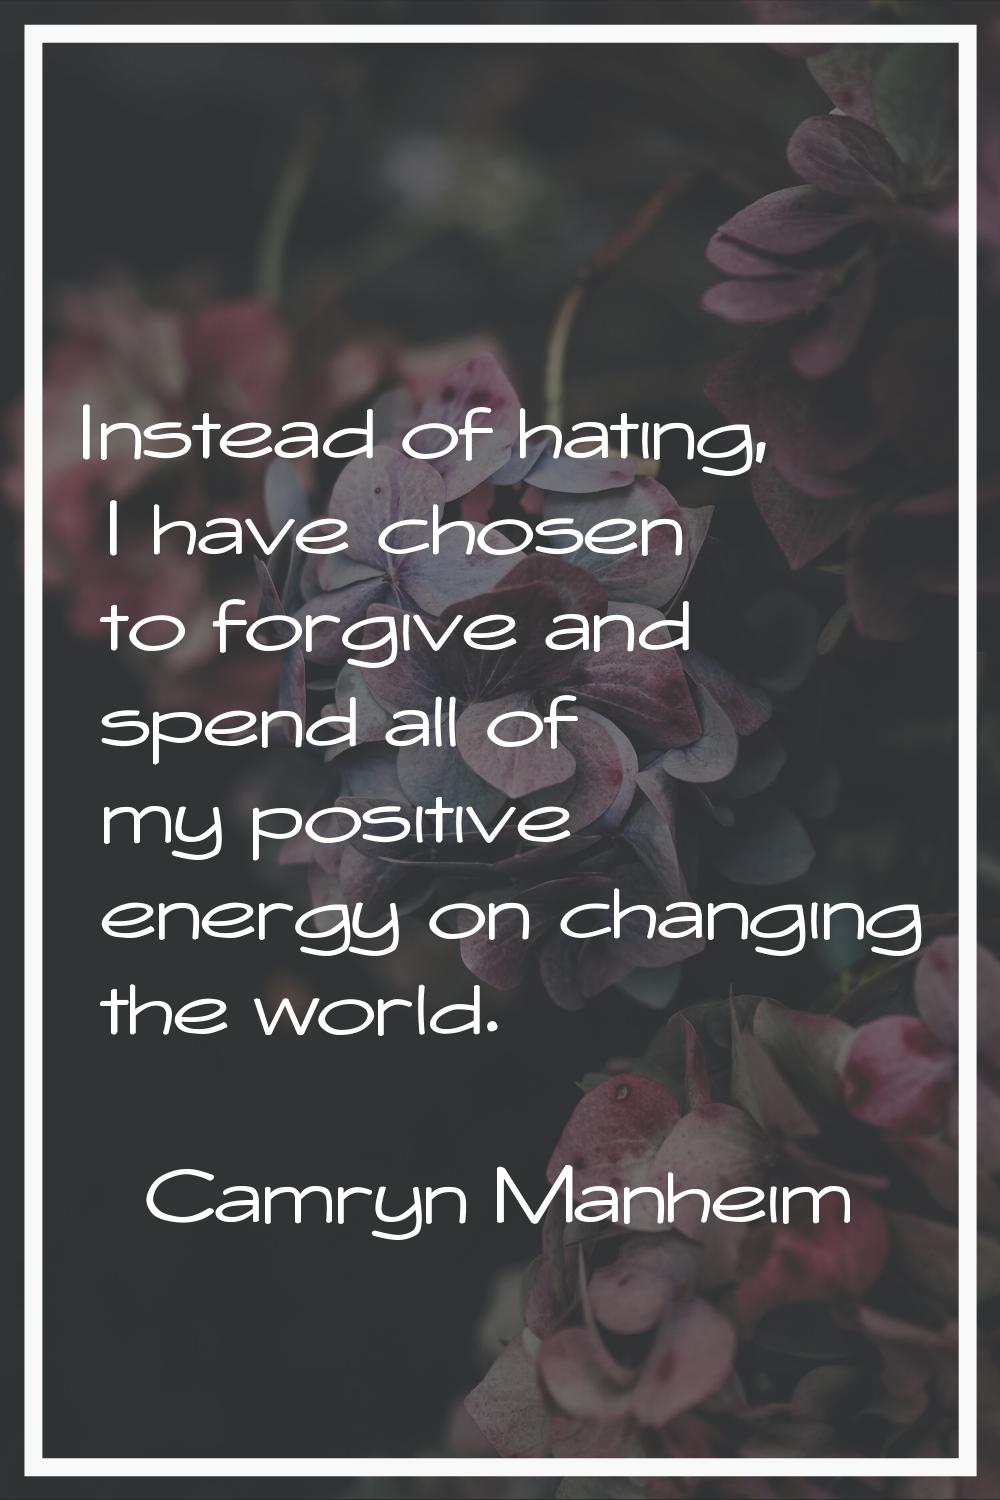 Instead of hating, I have chosen to forgive and spend all of my positive energy on changing the wor